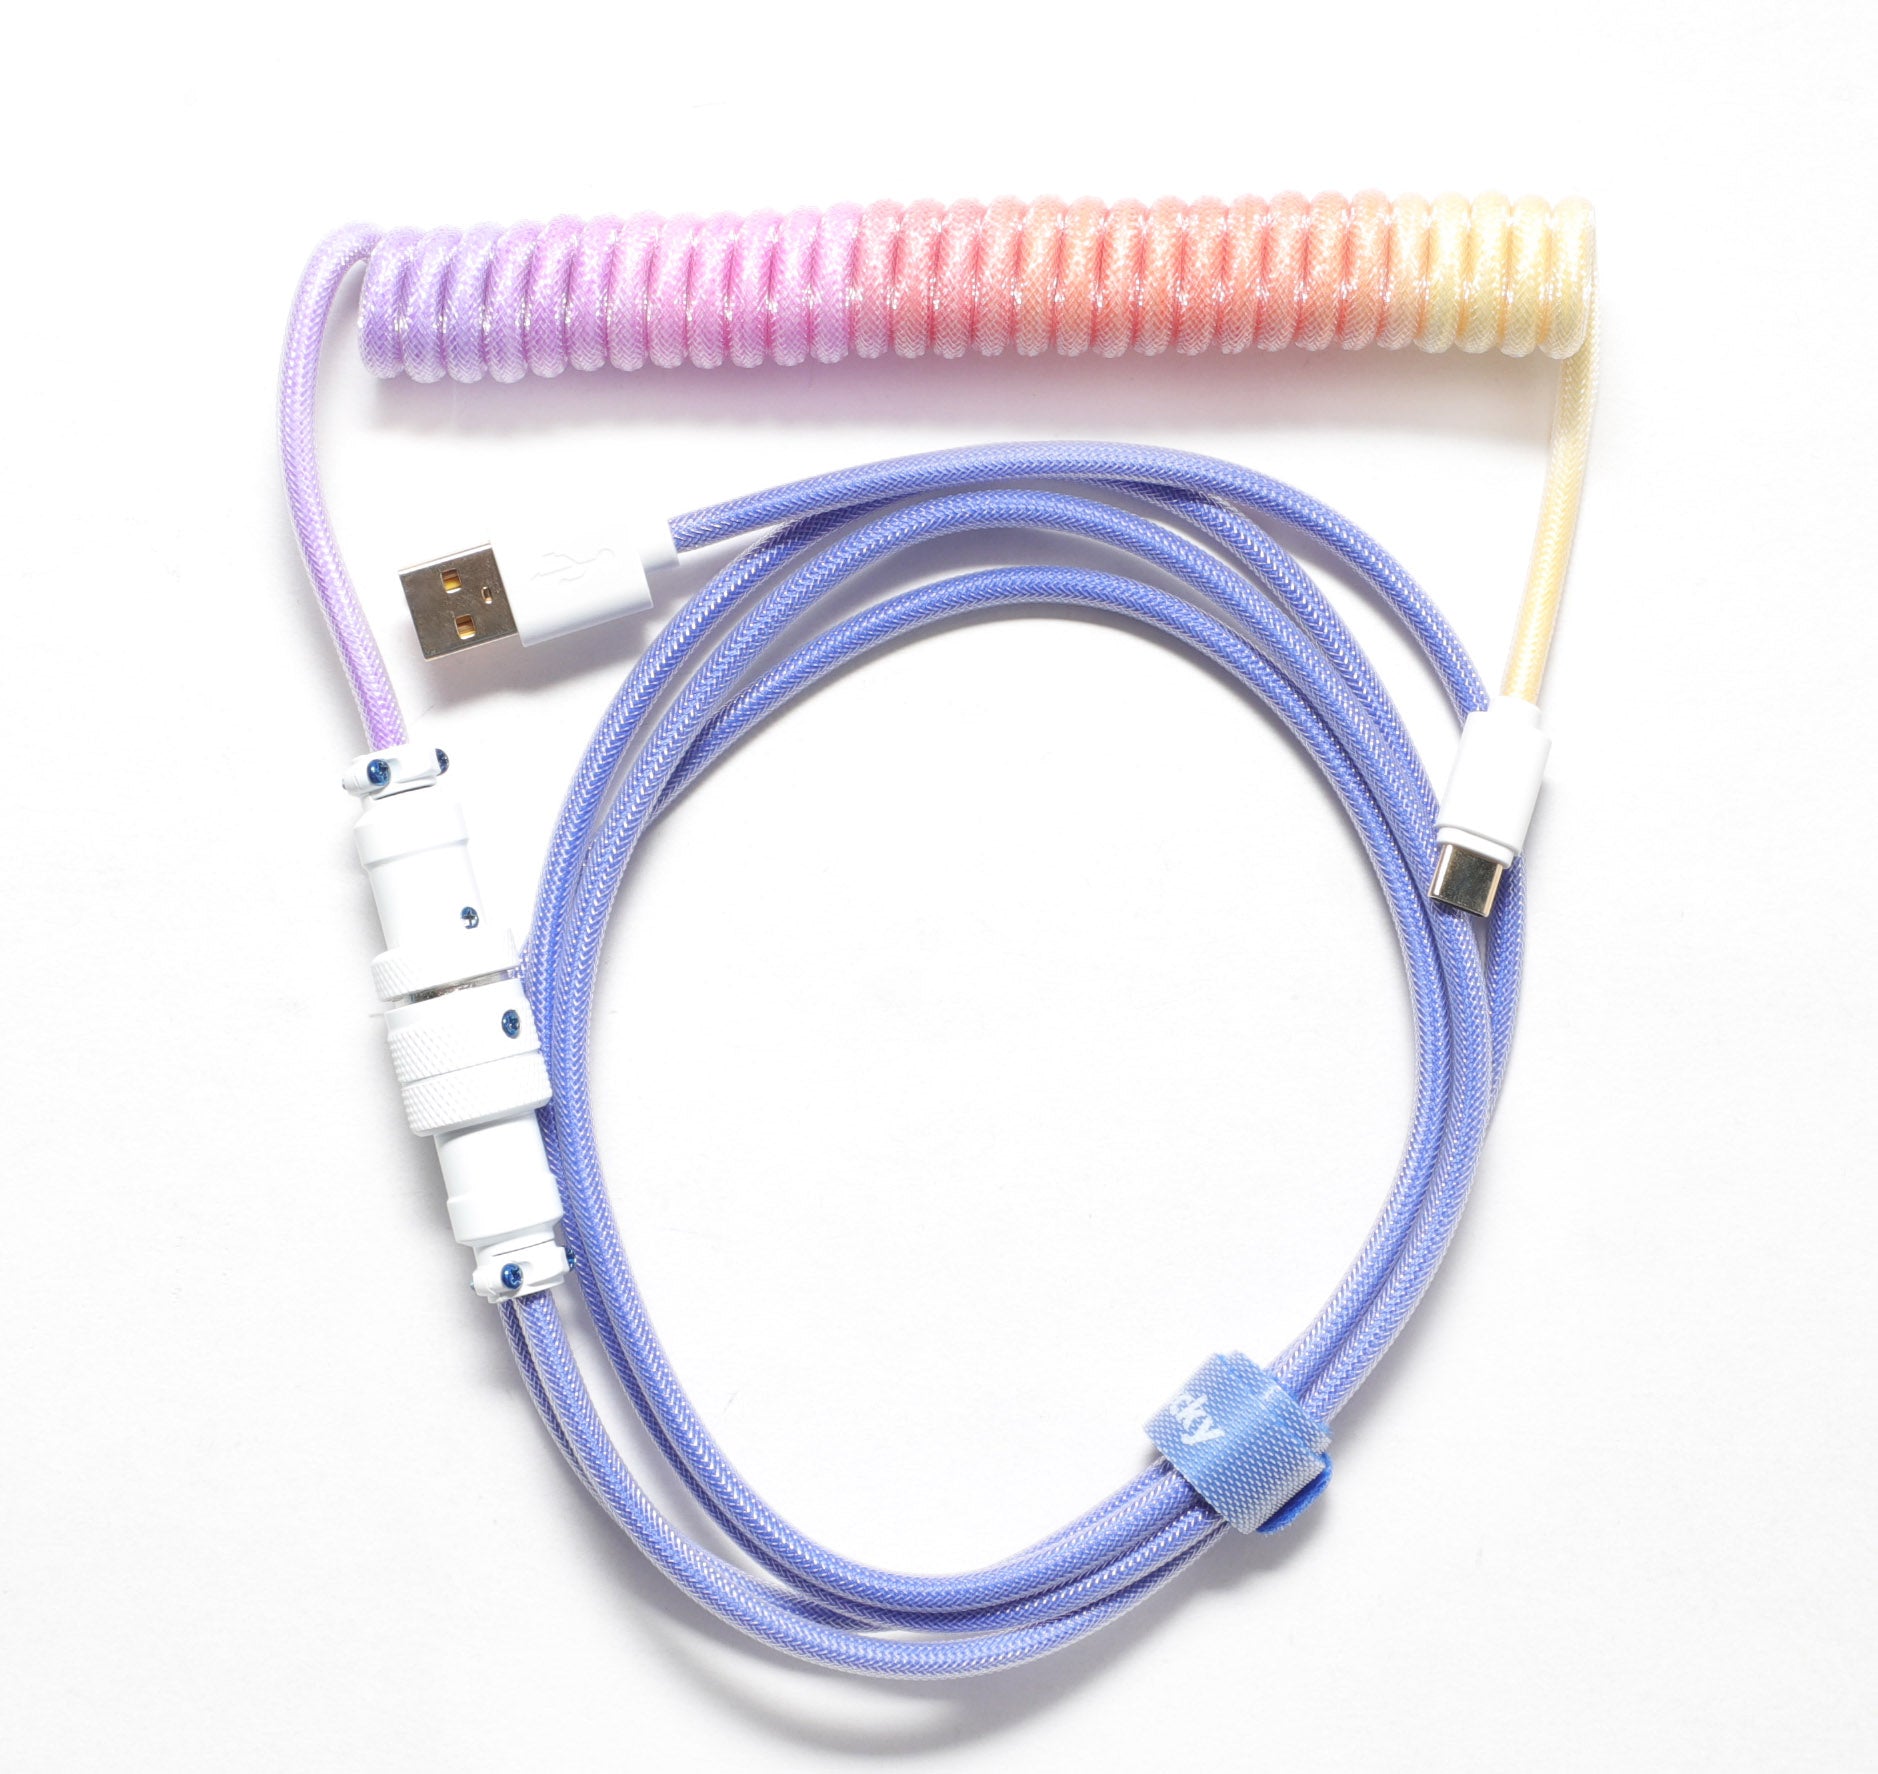 Ducky Afterglow Coiled USB Cable V2 MK6136O4MJ |0|